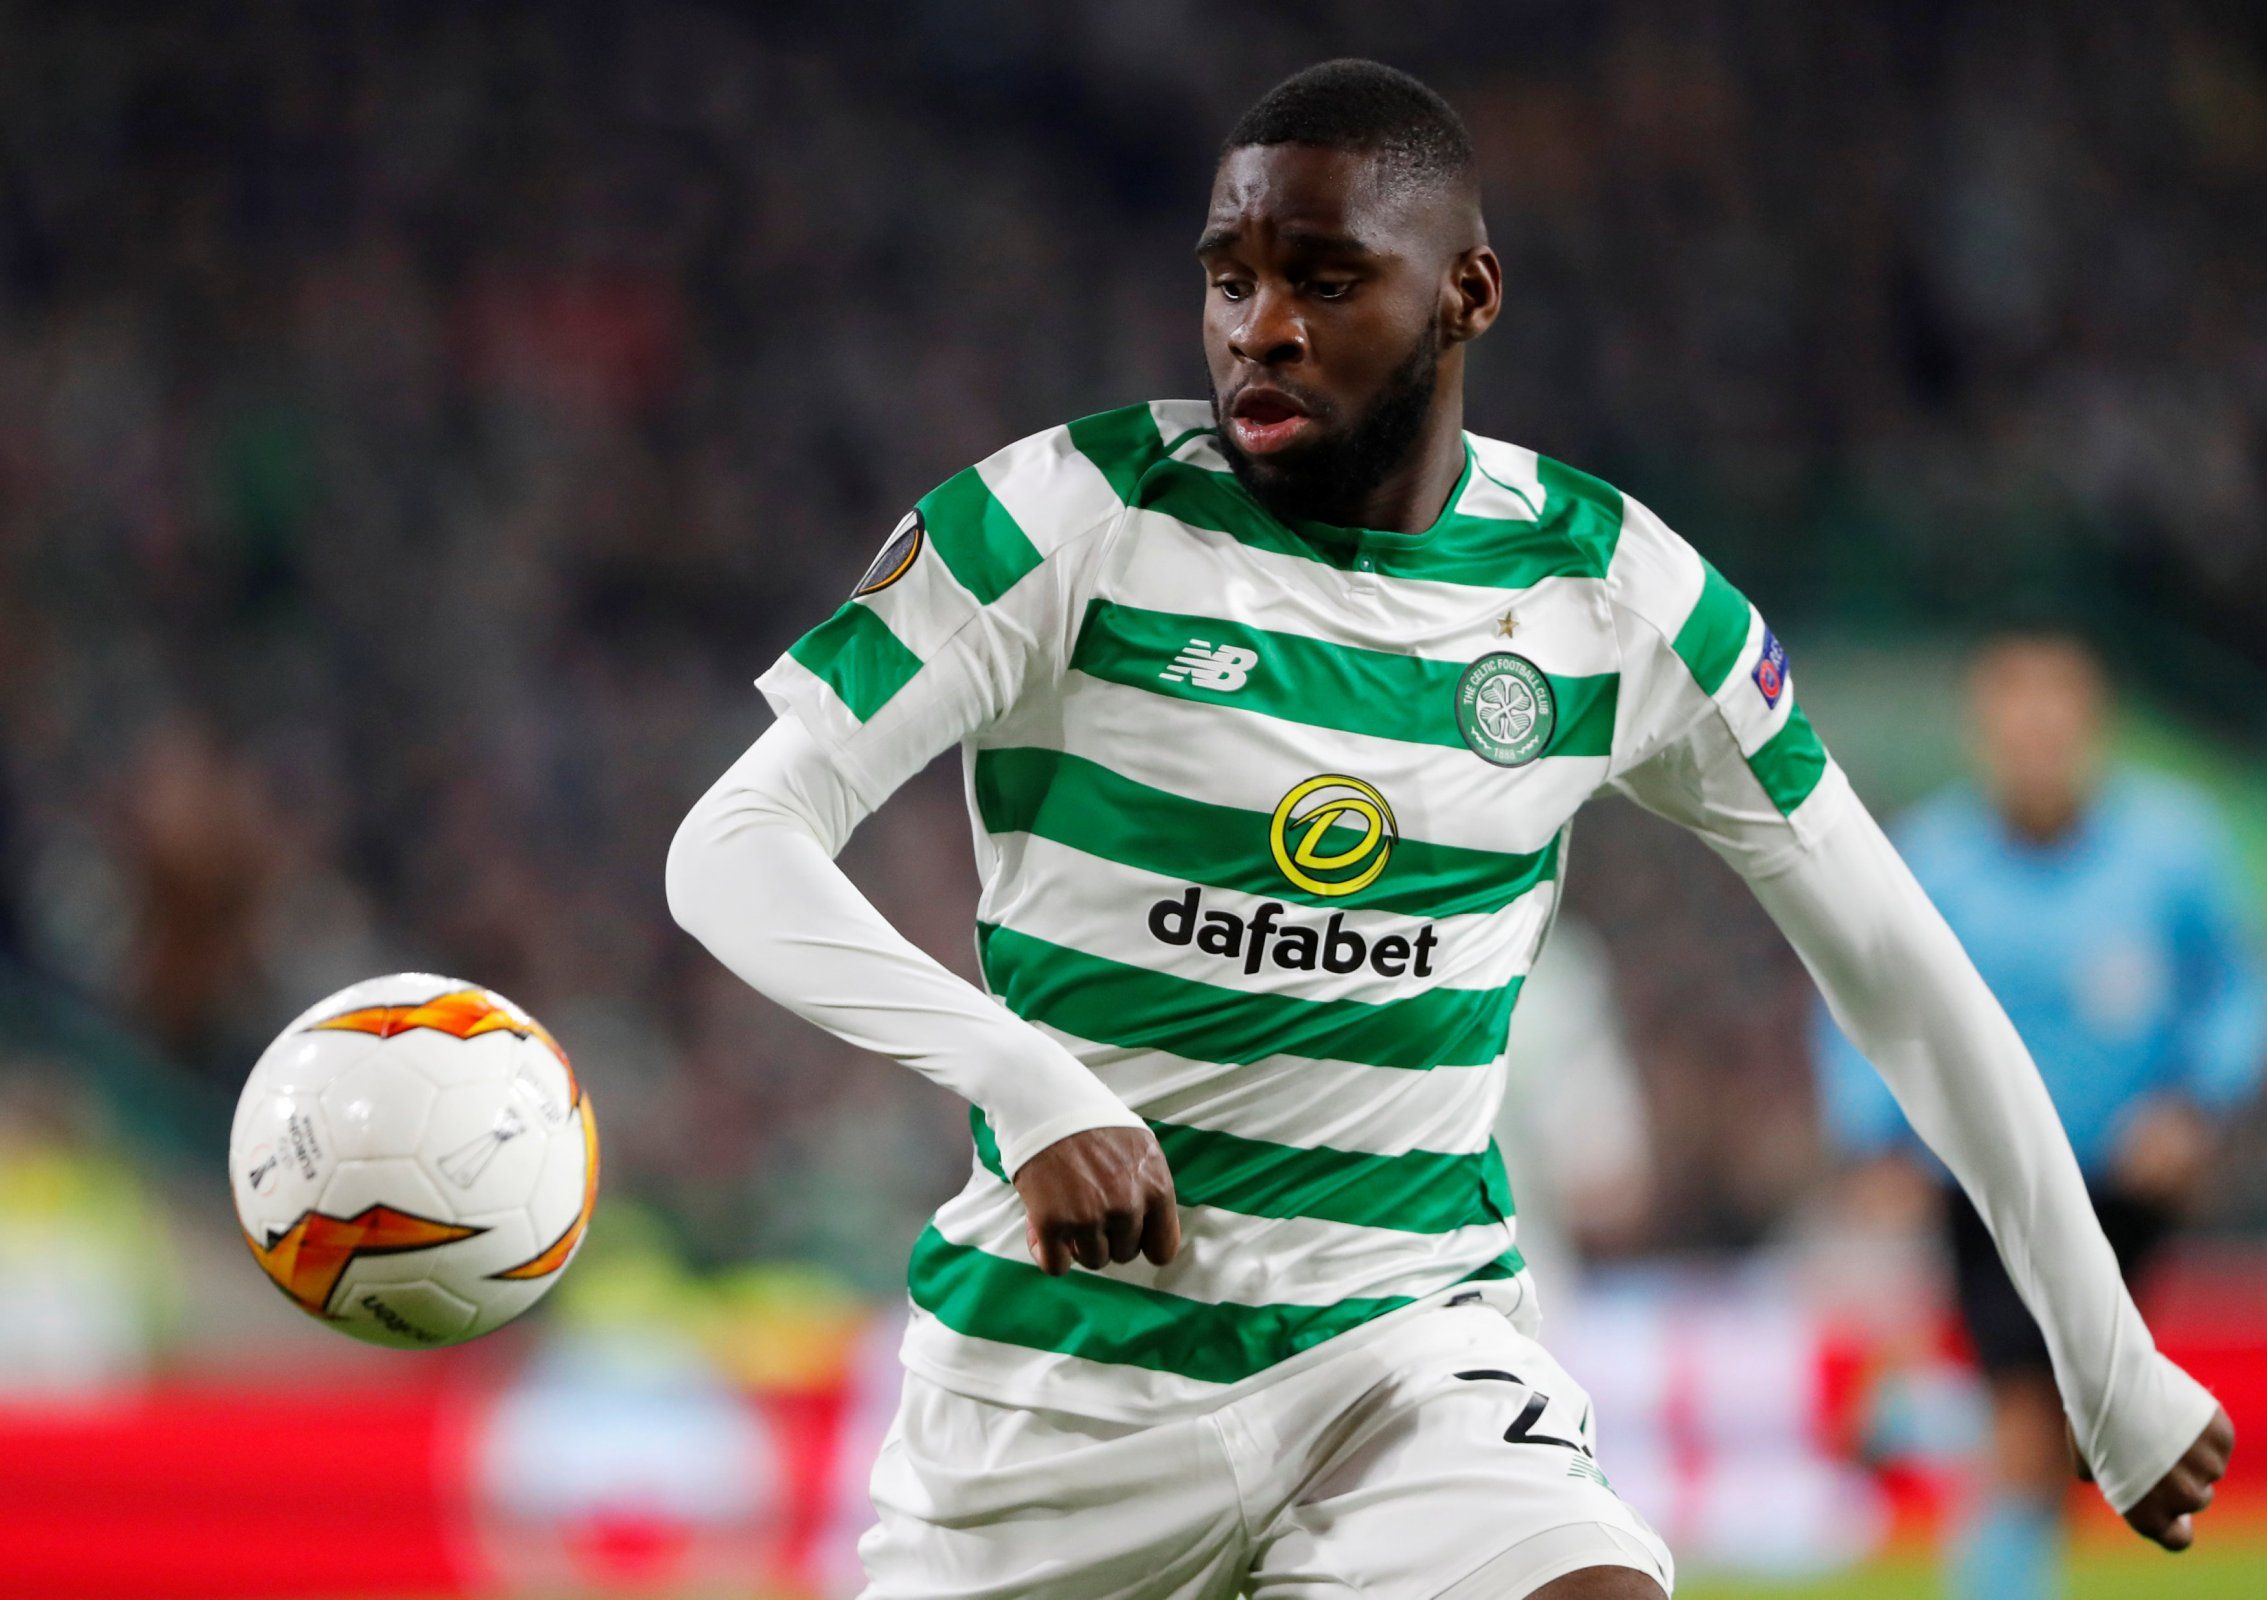 Celtic suffer blow ahead of Aberdeen as Odsonne Edouard not likely to feature | FootballFanCast.com